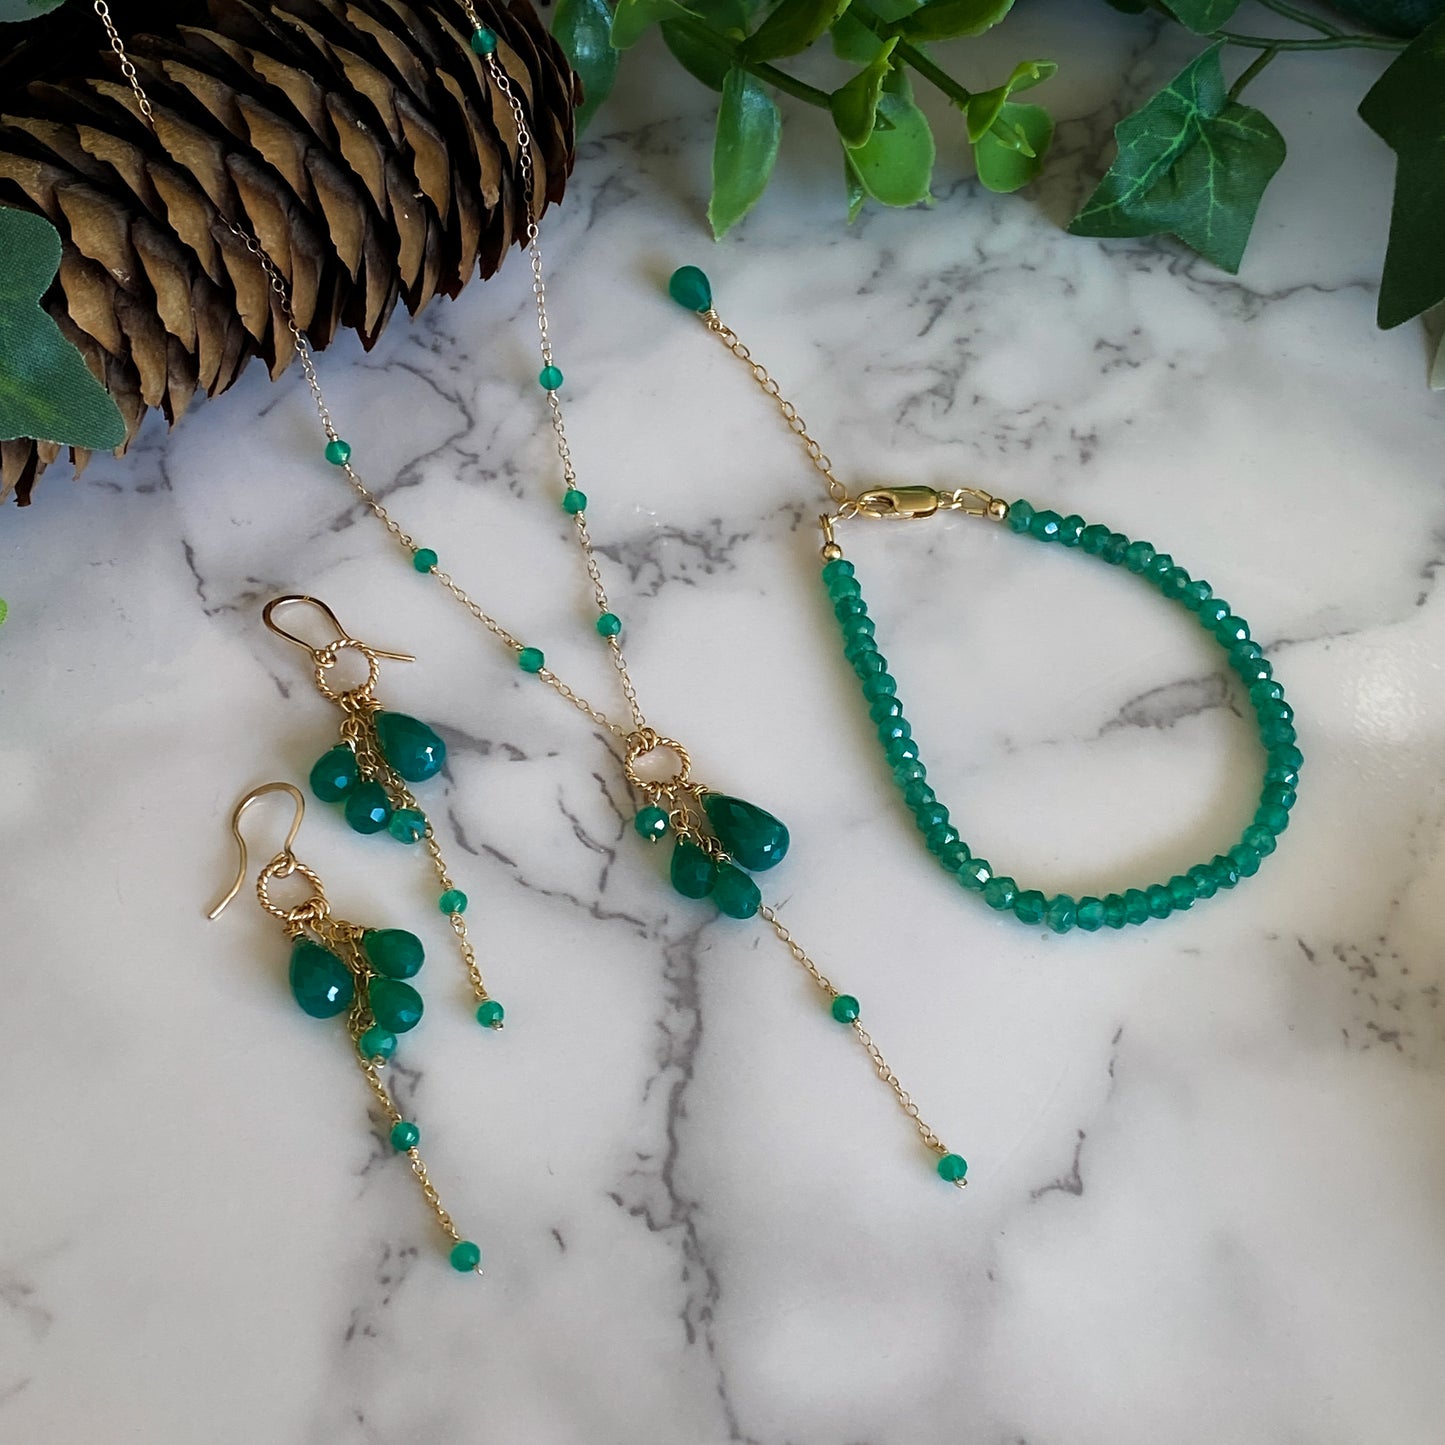 Daphne ~ Green Onyx and 14k Gold Filled Layered Earrings